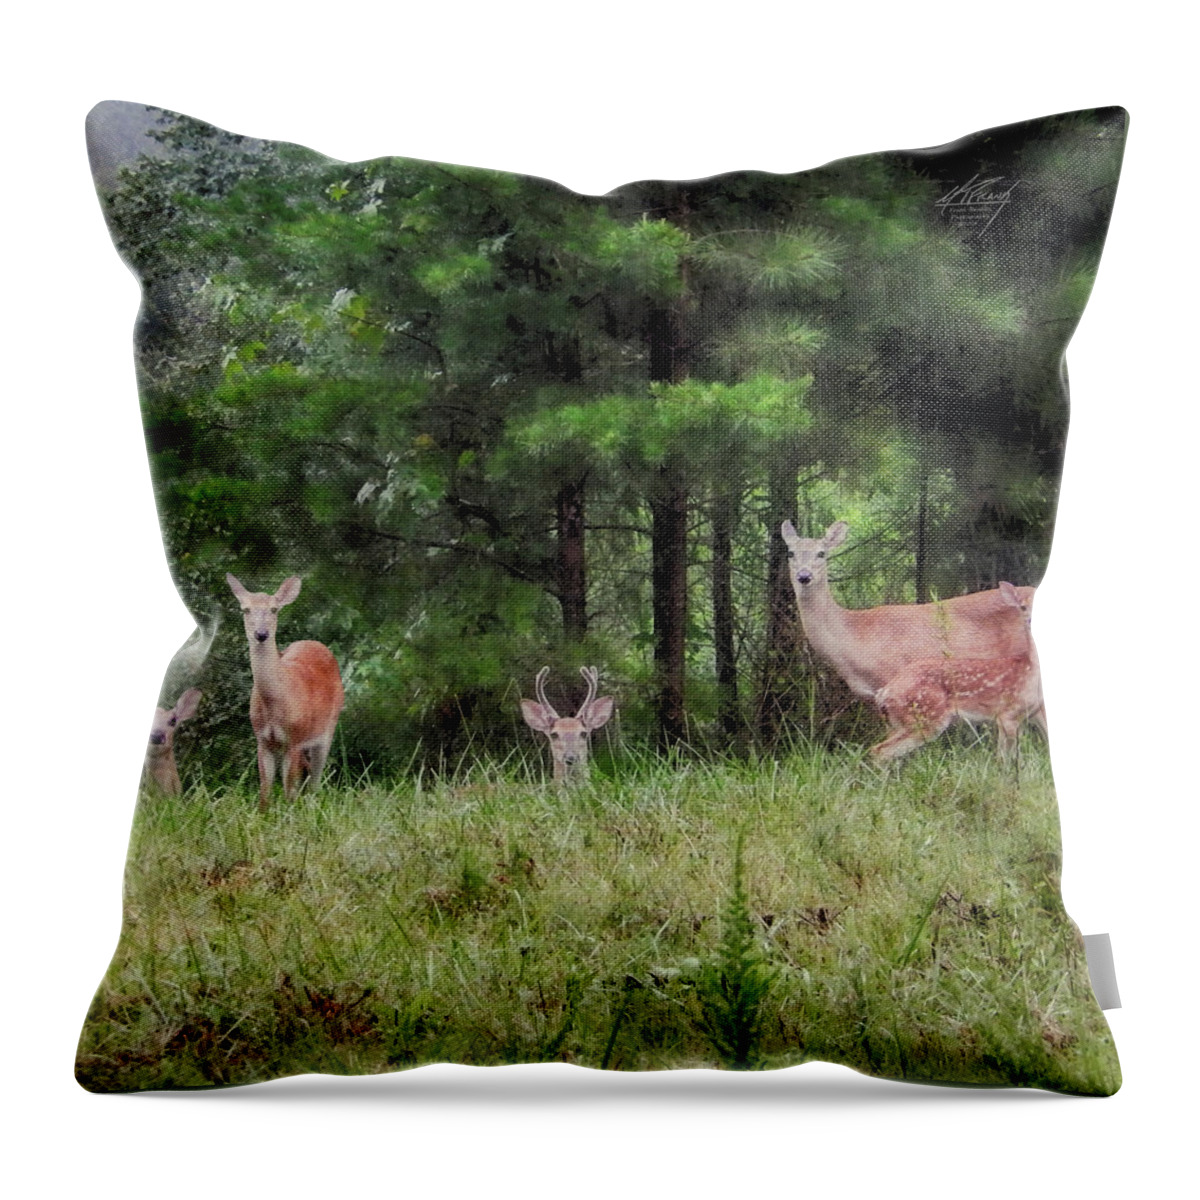 Deer Throw Pillow featuring the photograph I've Been Spotted by Michael Frank